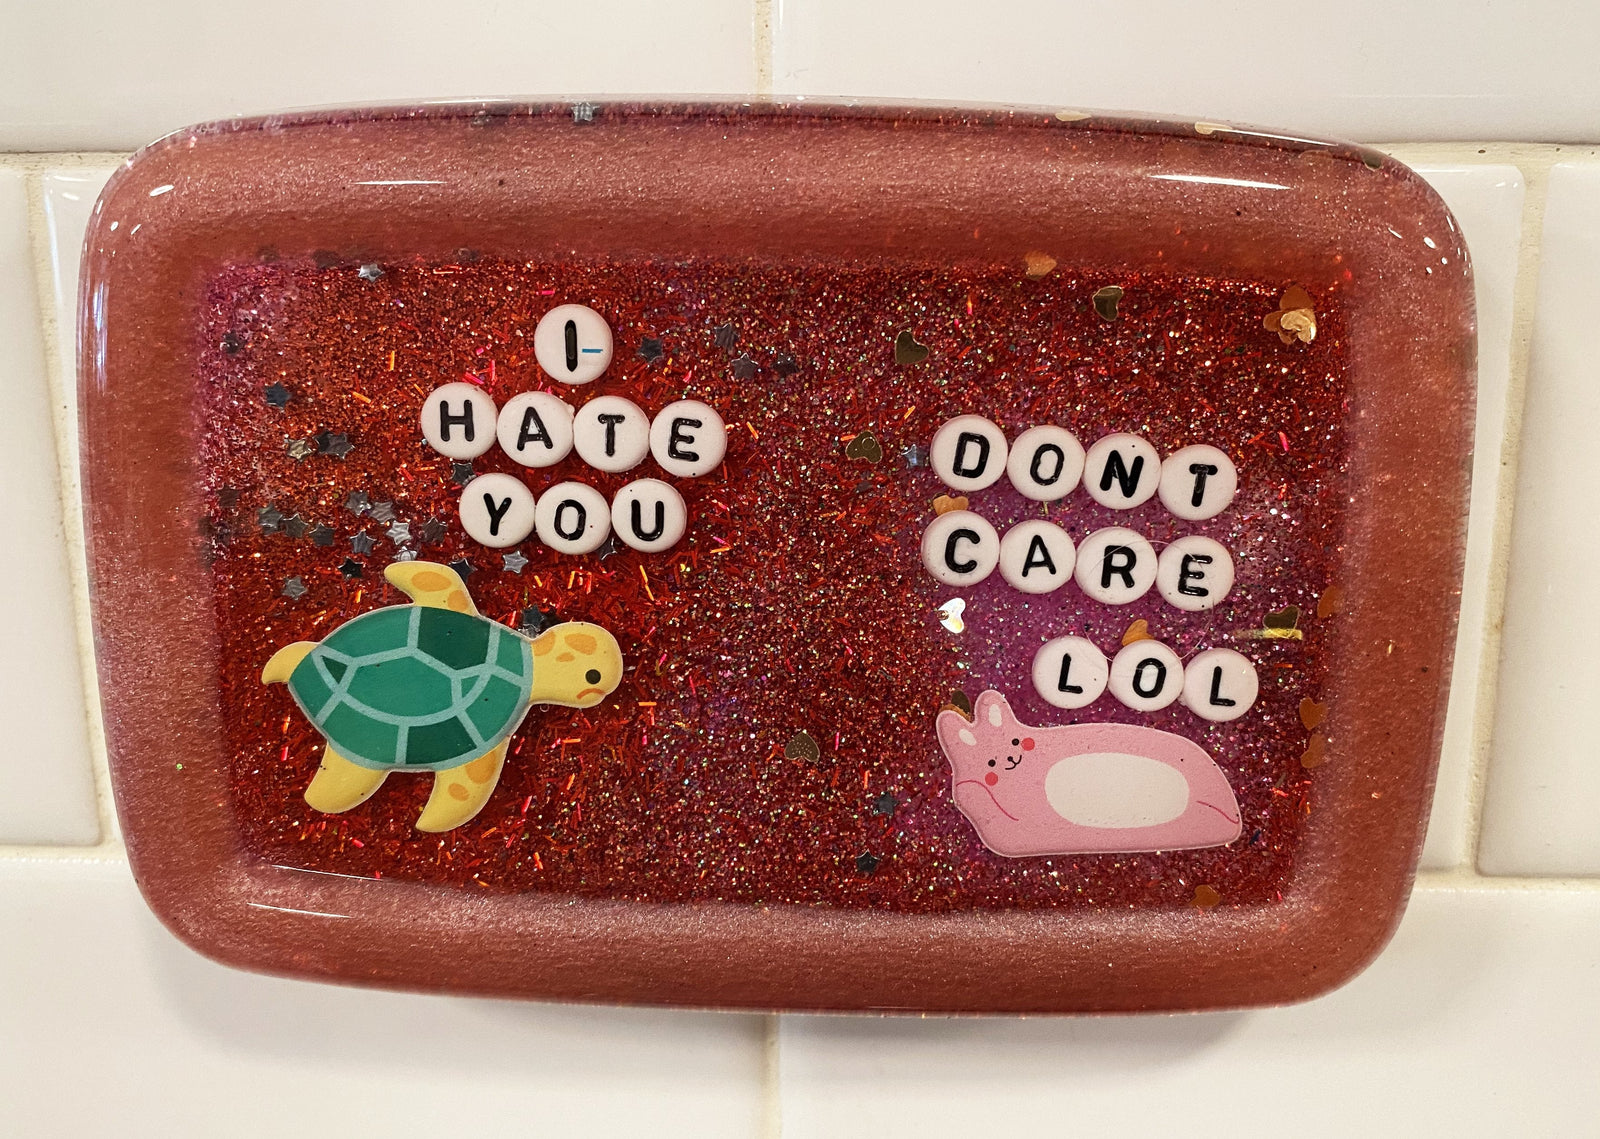 I Hate You. Don't Care. LOL - Large Shower Art - READY TO SHIP